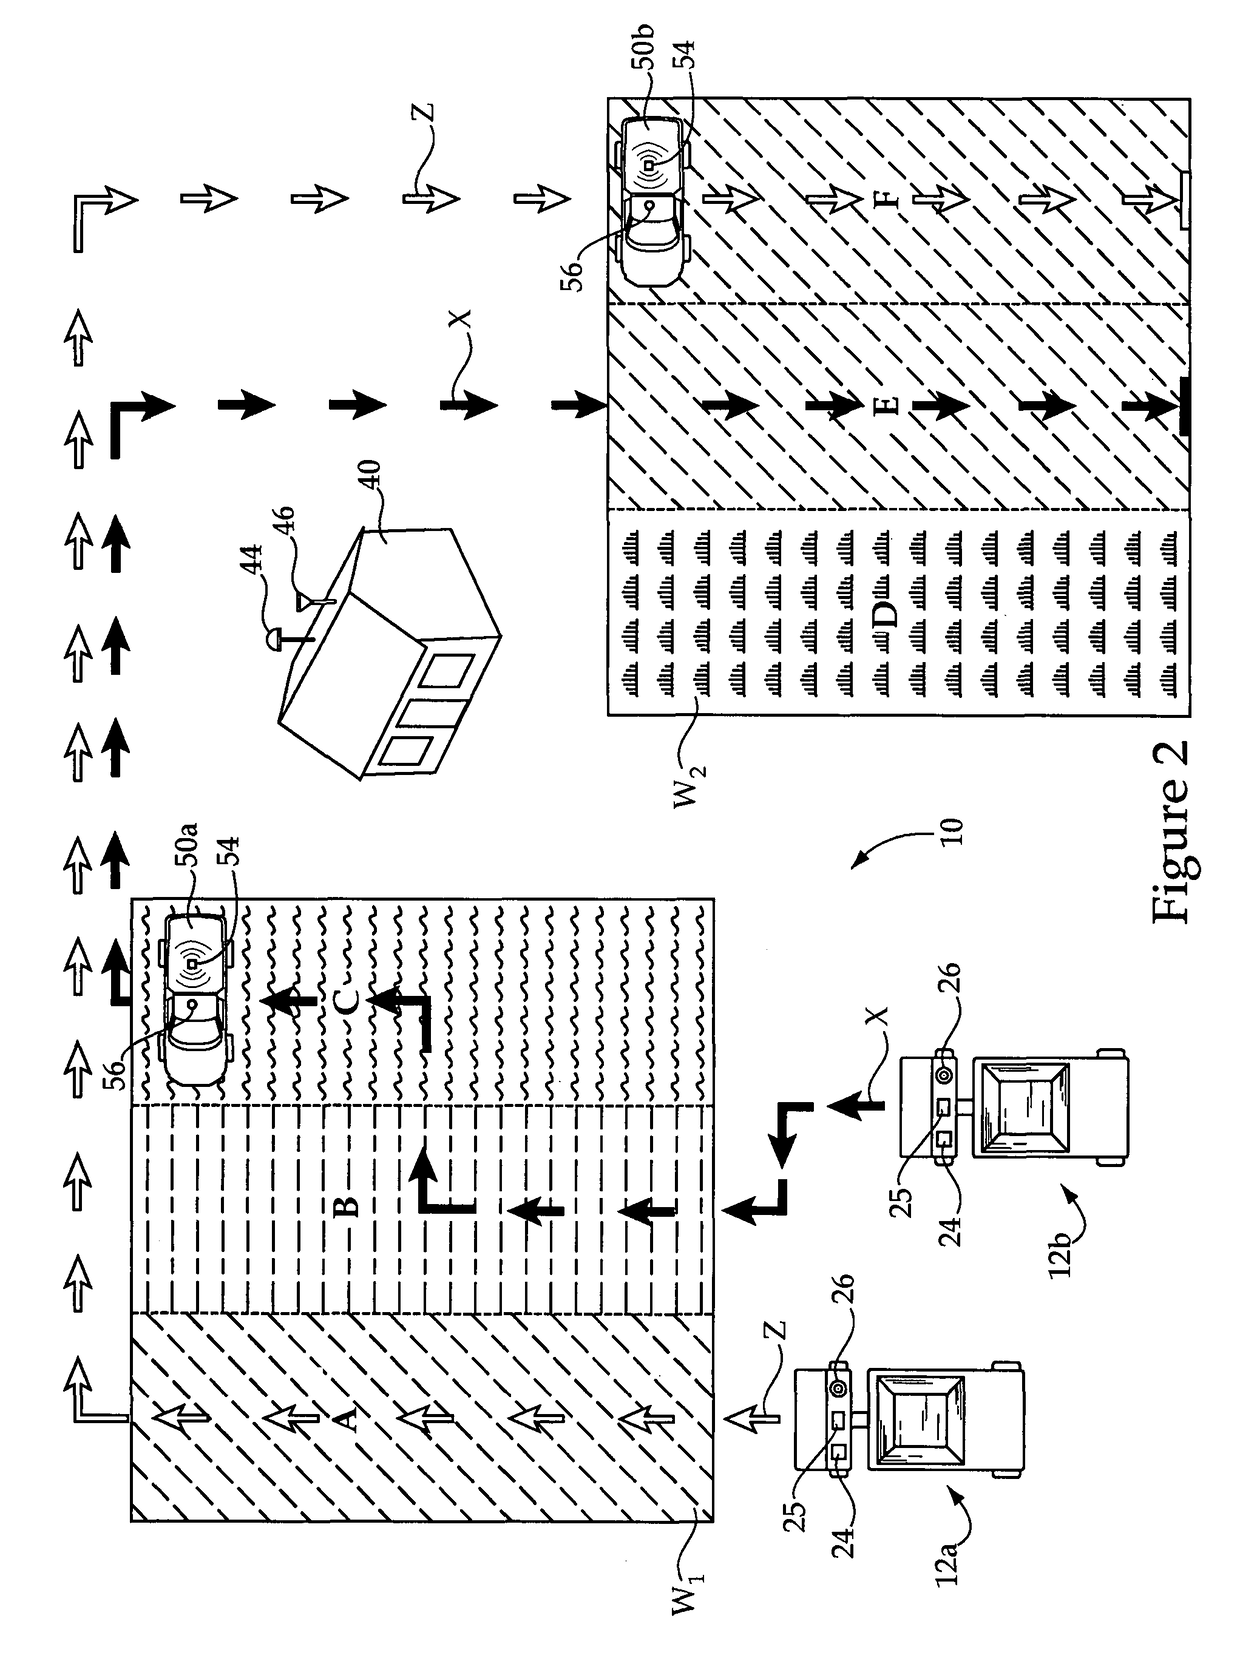 System and method for preparing a worksite based on soil moisture map data